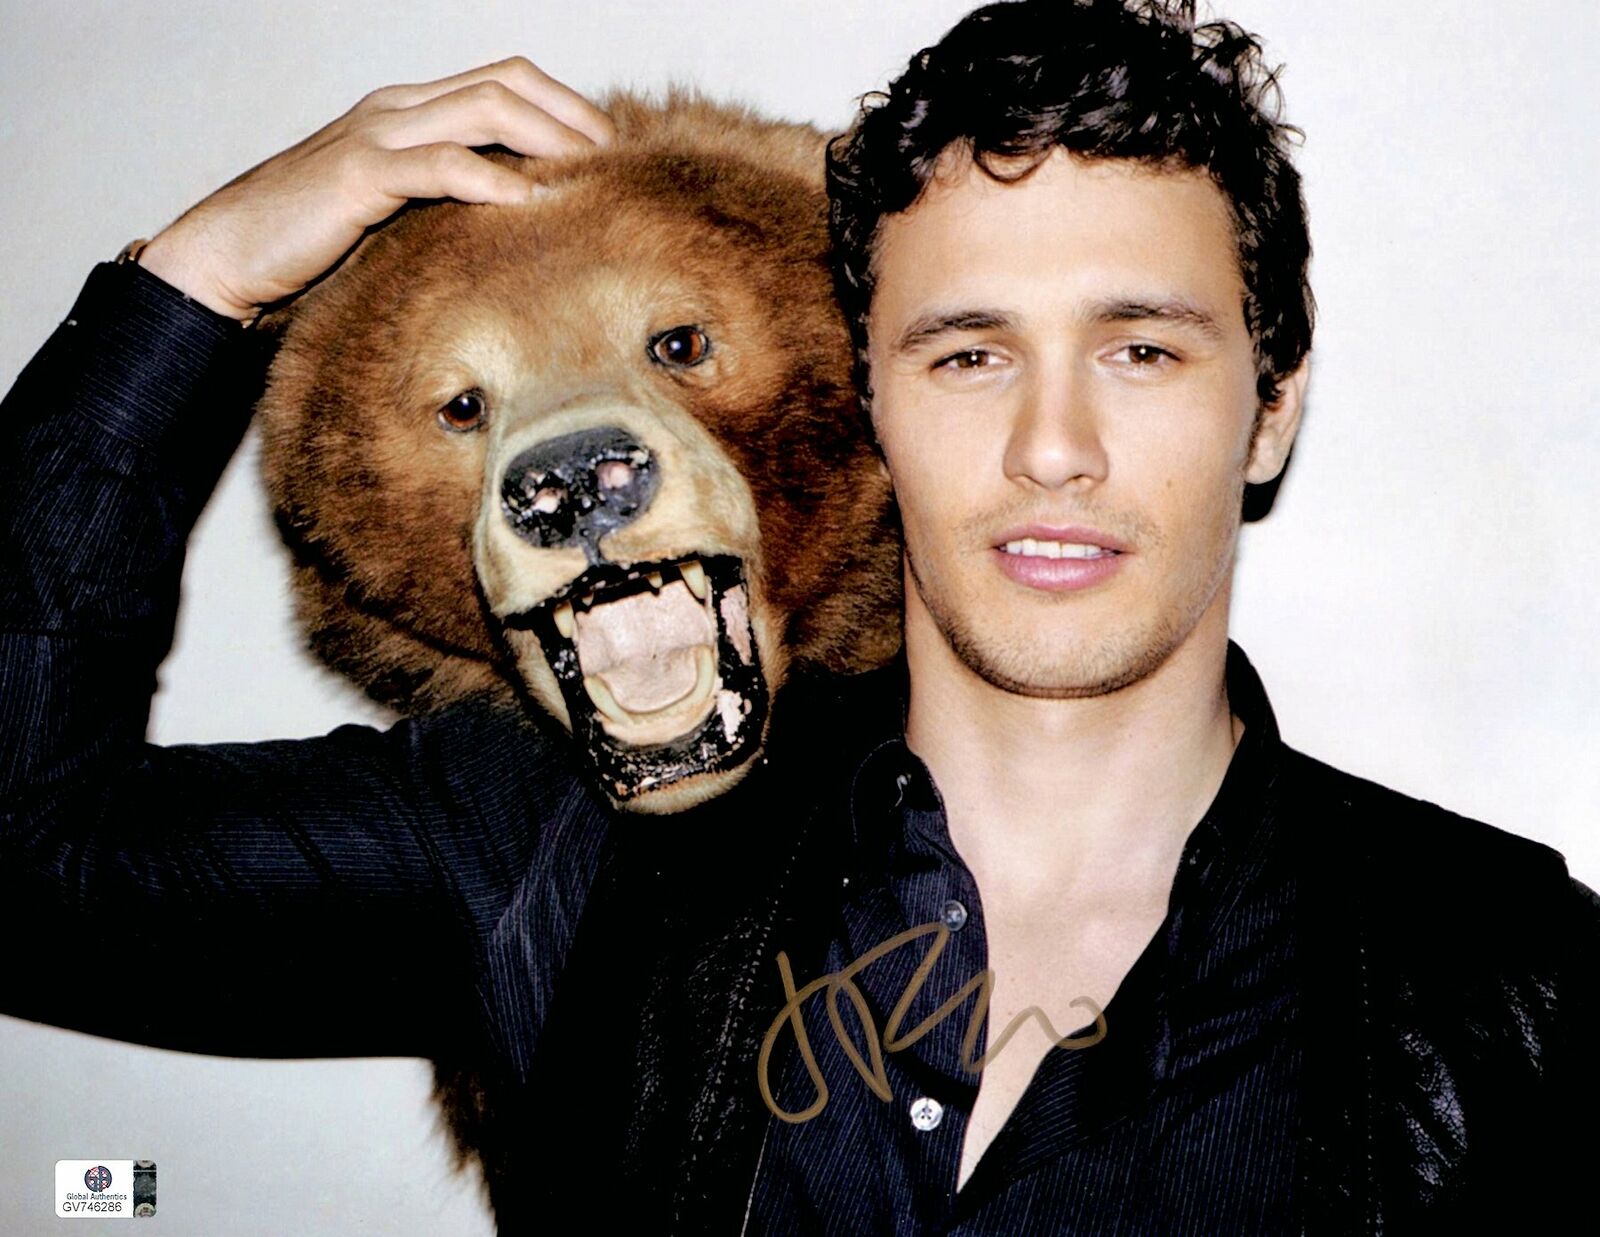 James Franco Signed Autographed 11X14 Photo Poster painting Young Holding Bear Head GV746286